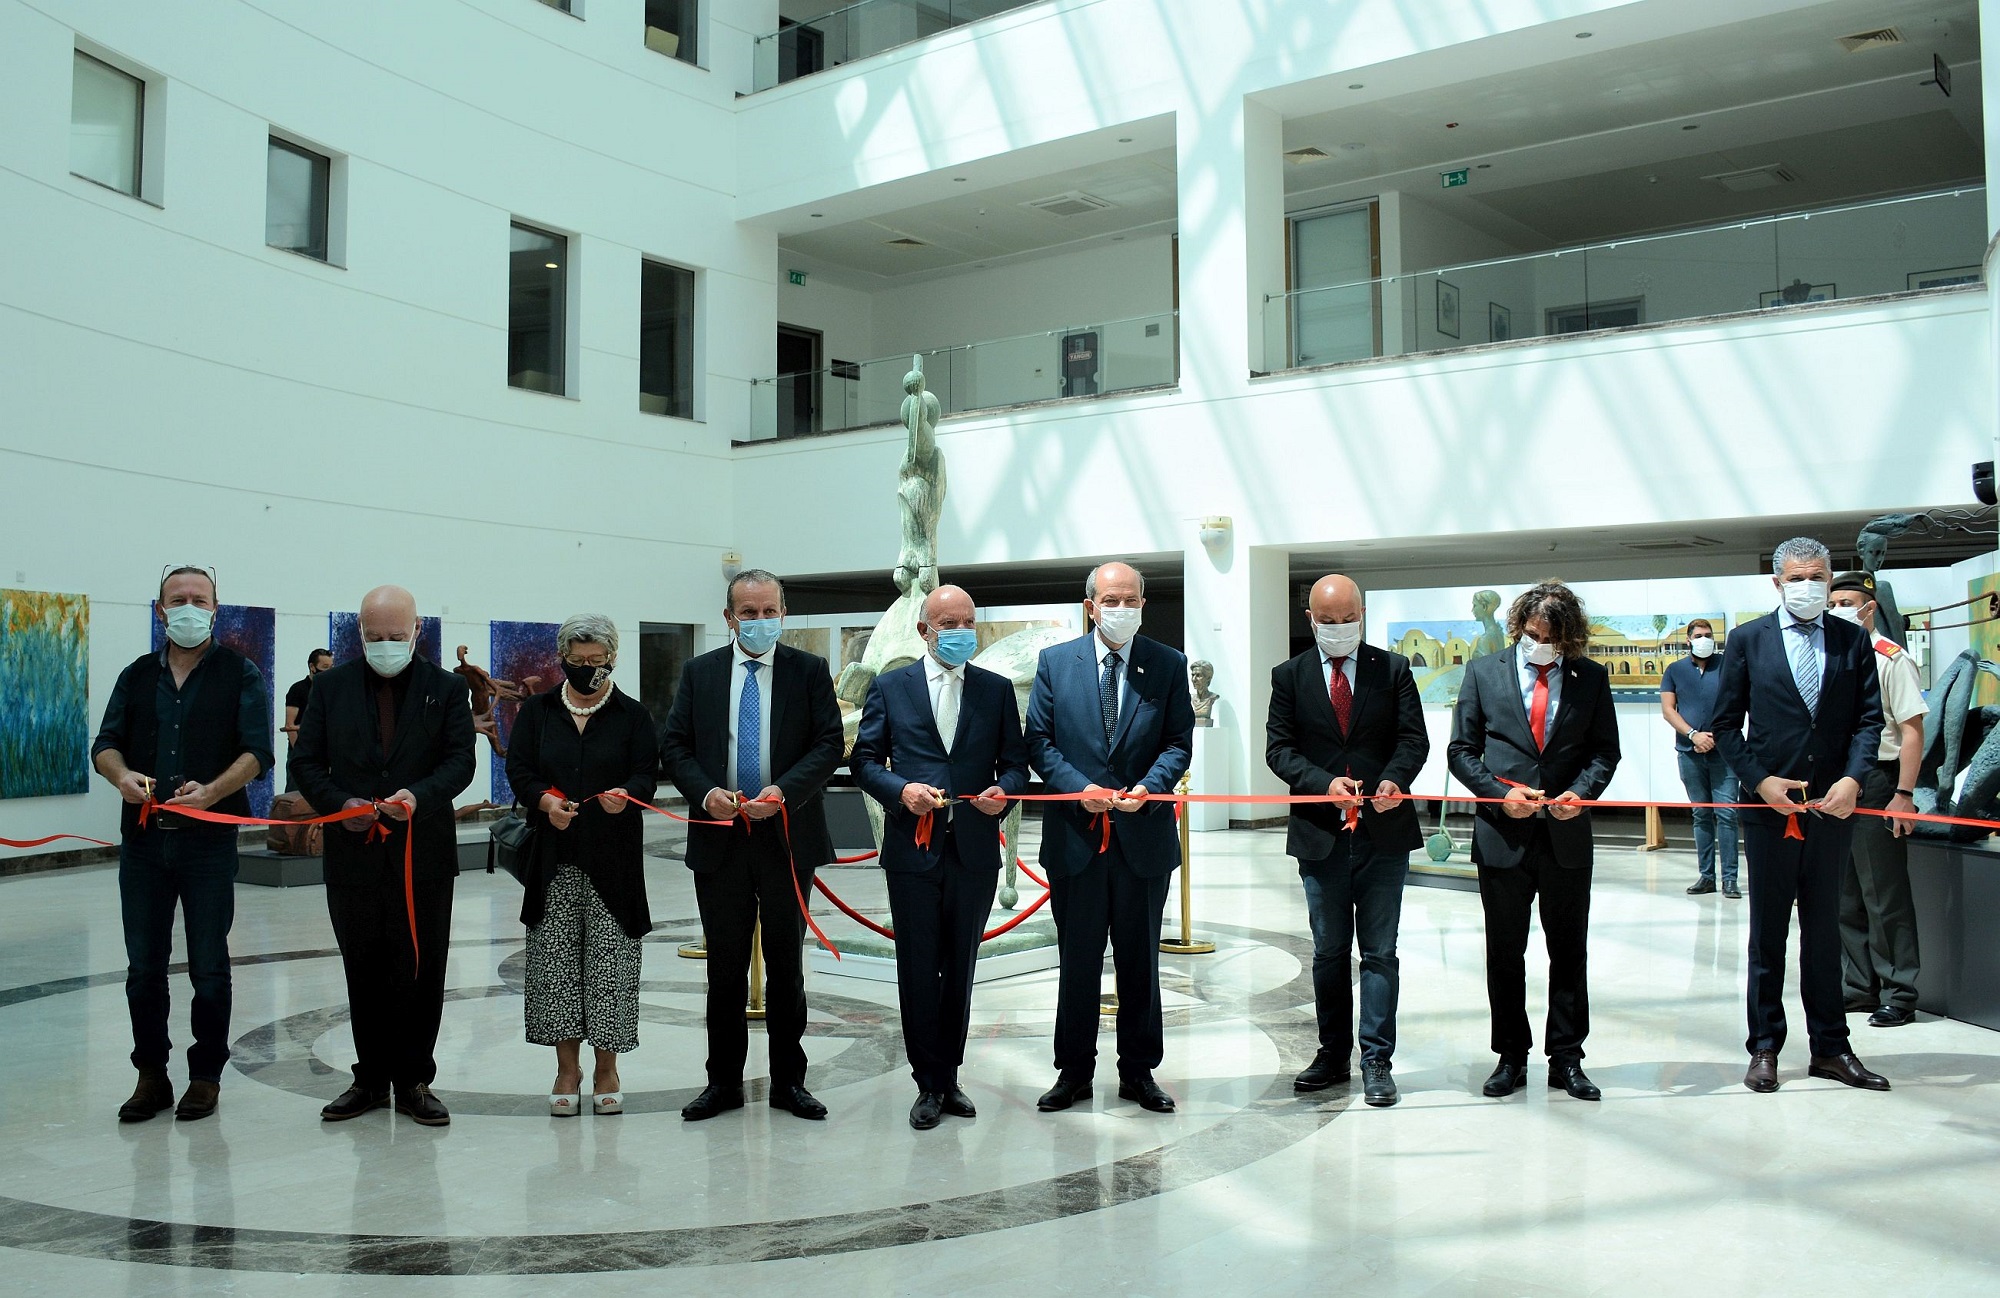 The February Exhibition of Fine Arts, inaugurated by President Ersin Tatar, will be open to visitors at the Near East University Hospital Exhibition Hall until 20 June